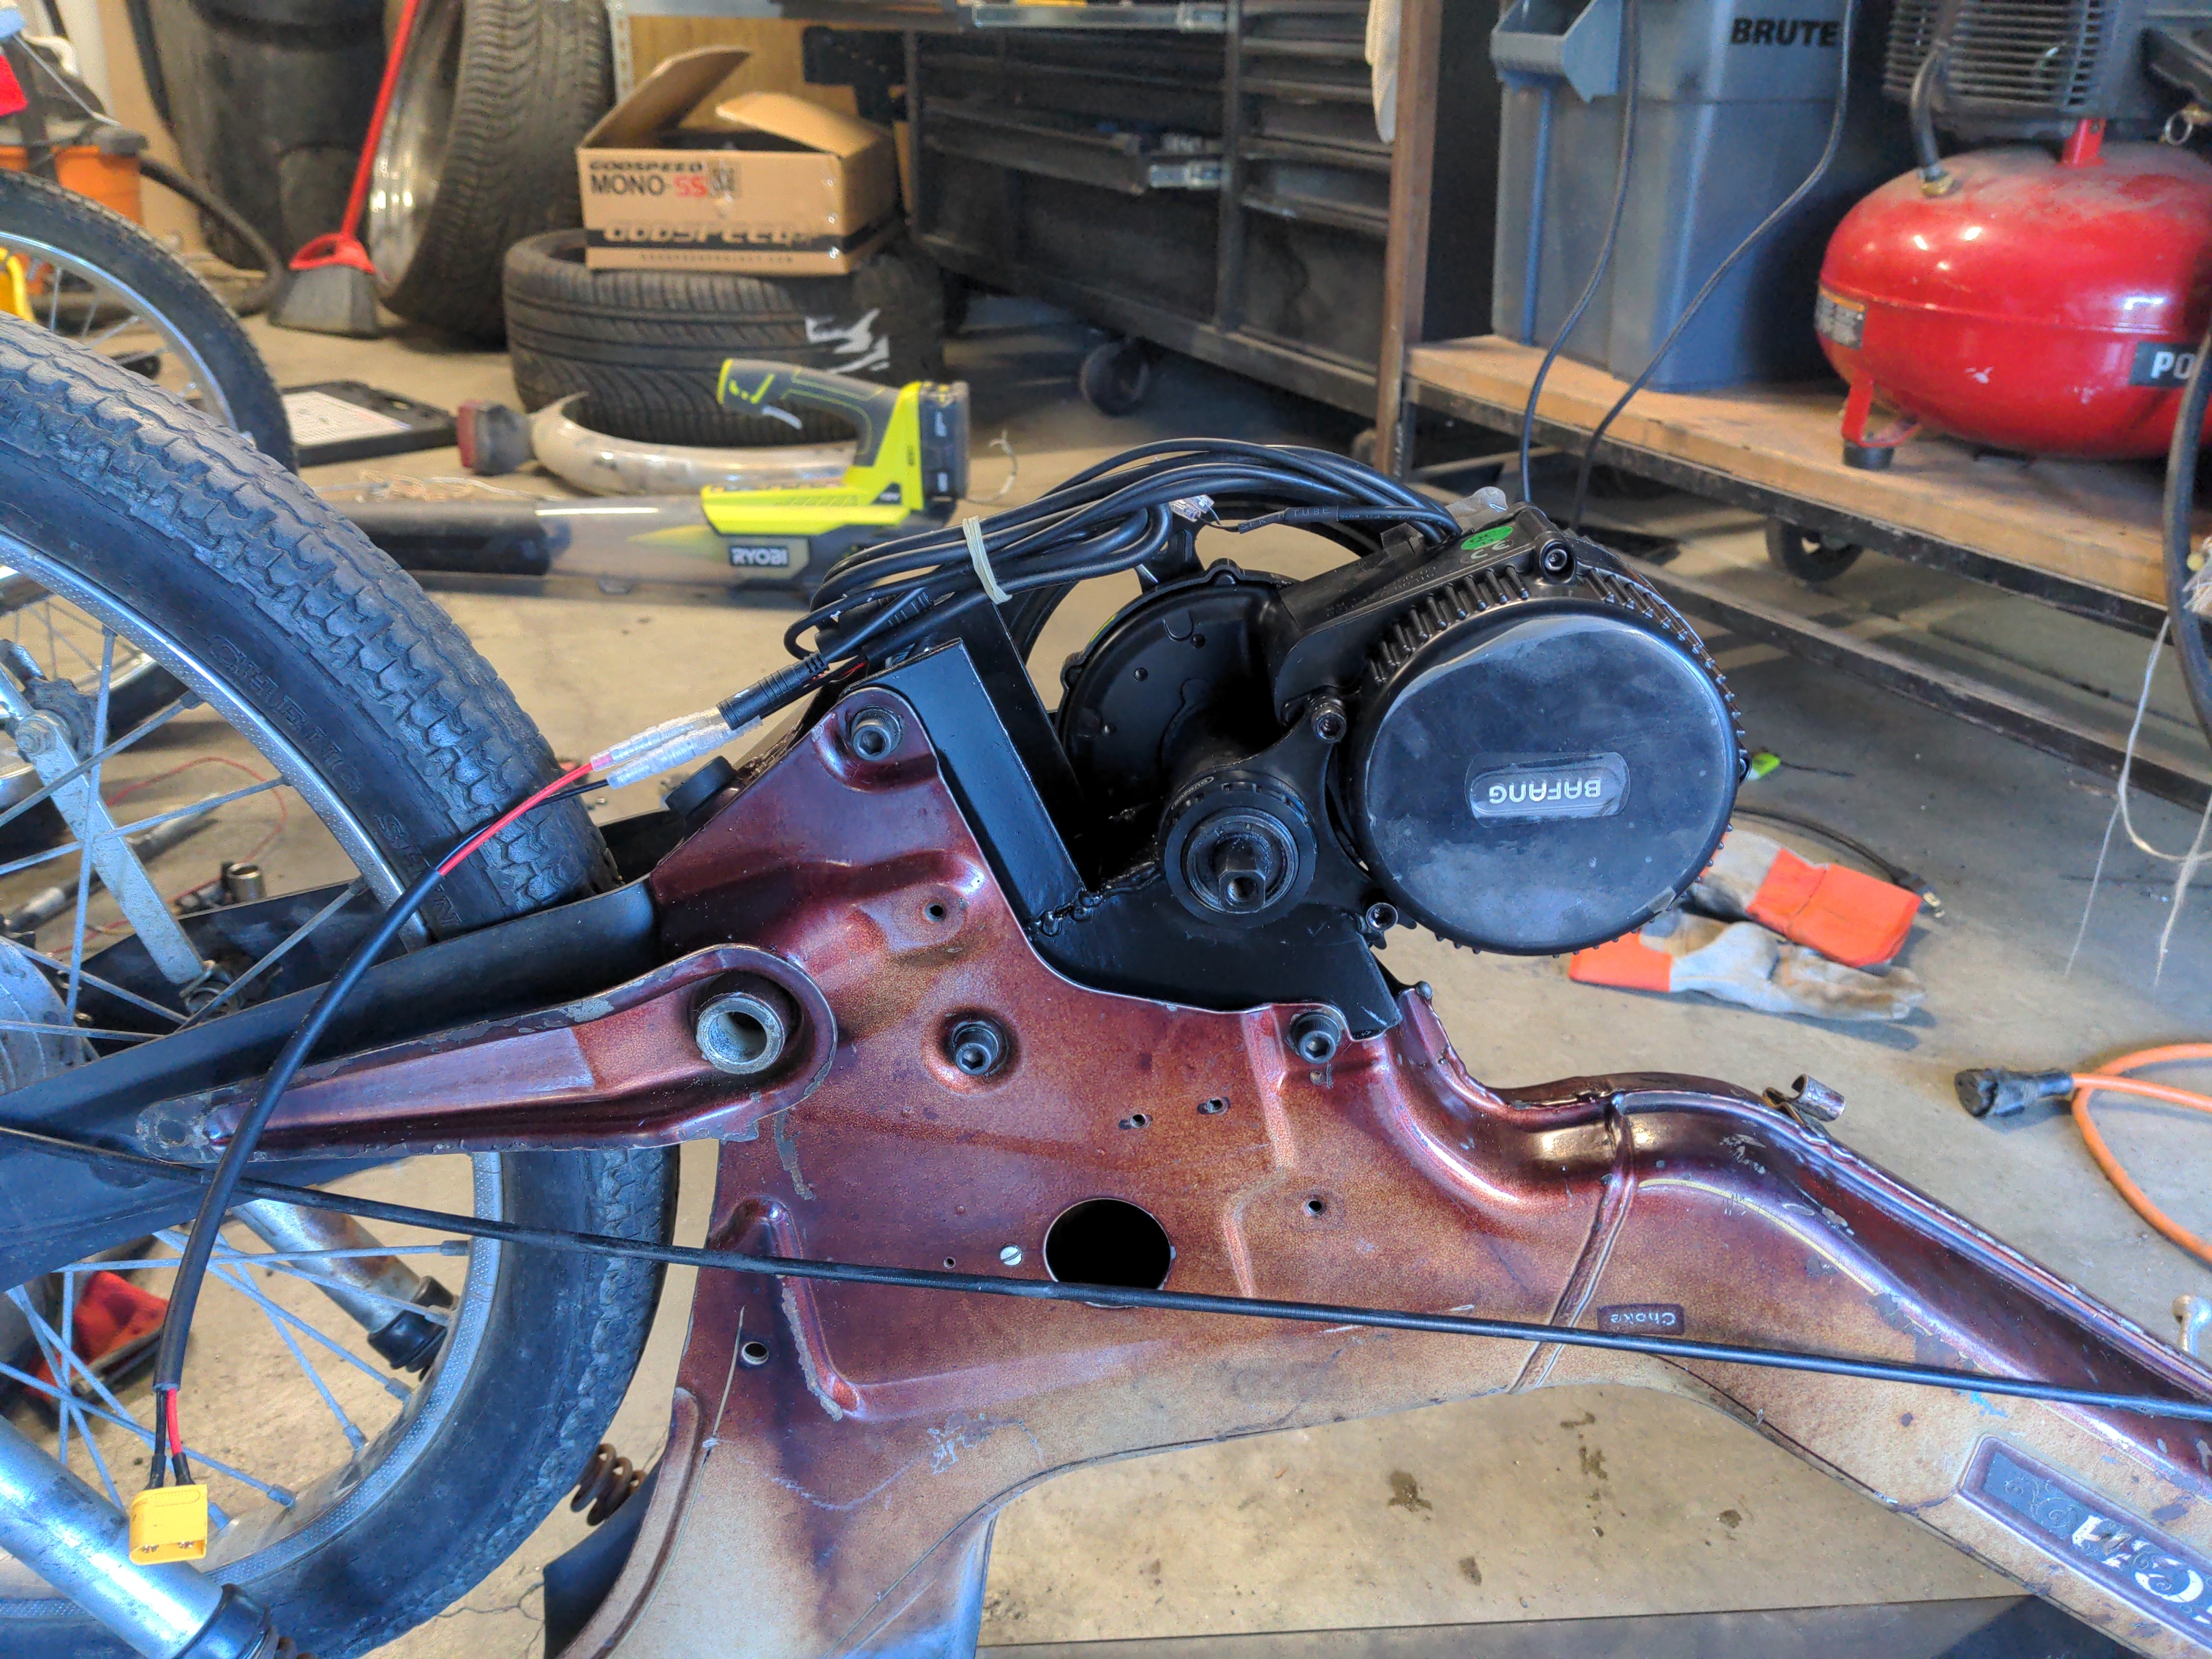 A custom fabricated metal bracket, slotted into the frame of a Puch moped. The electric motor has been mounted to the bracket, and is locked into position. The bracket has been painted black.